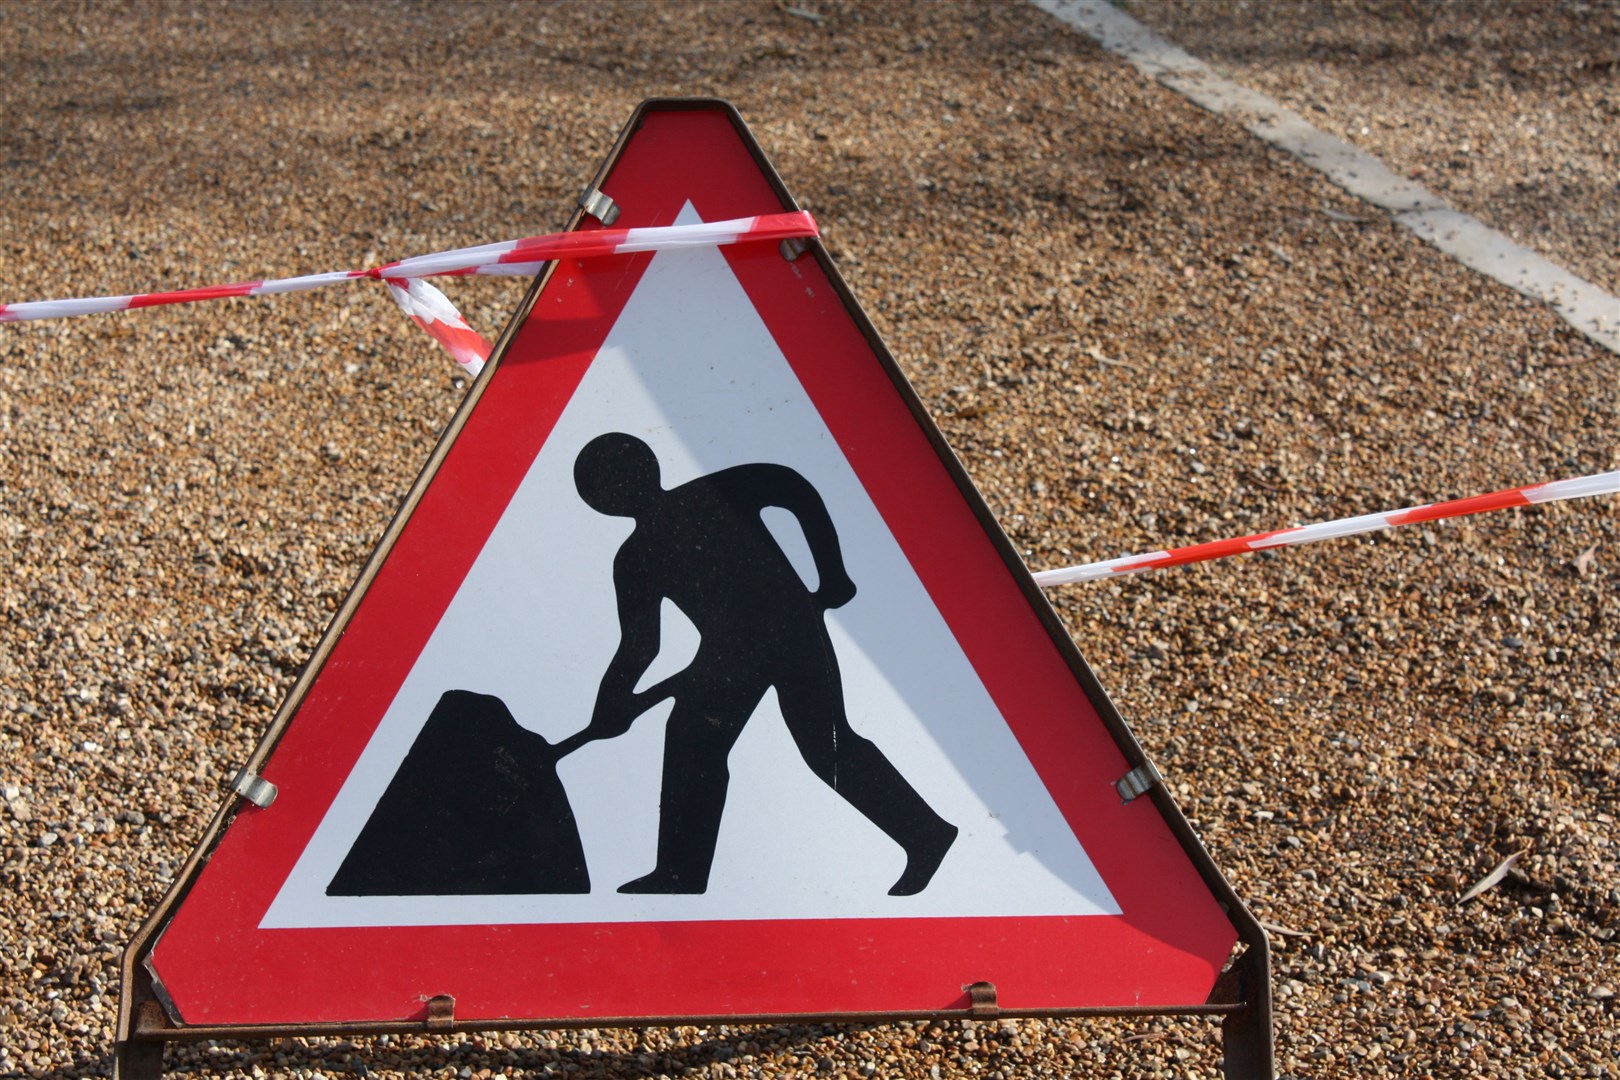 Roadworks will begin on Thursday on the A9 to the north of the Tore roundabout.